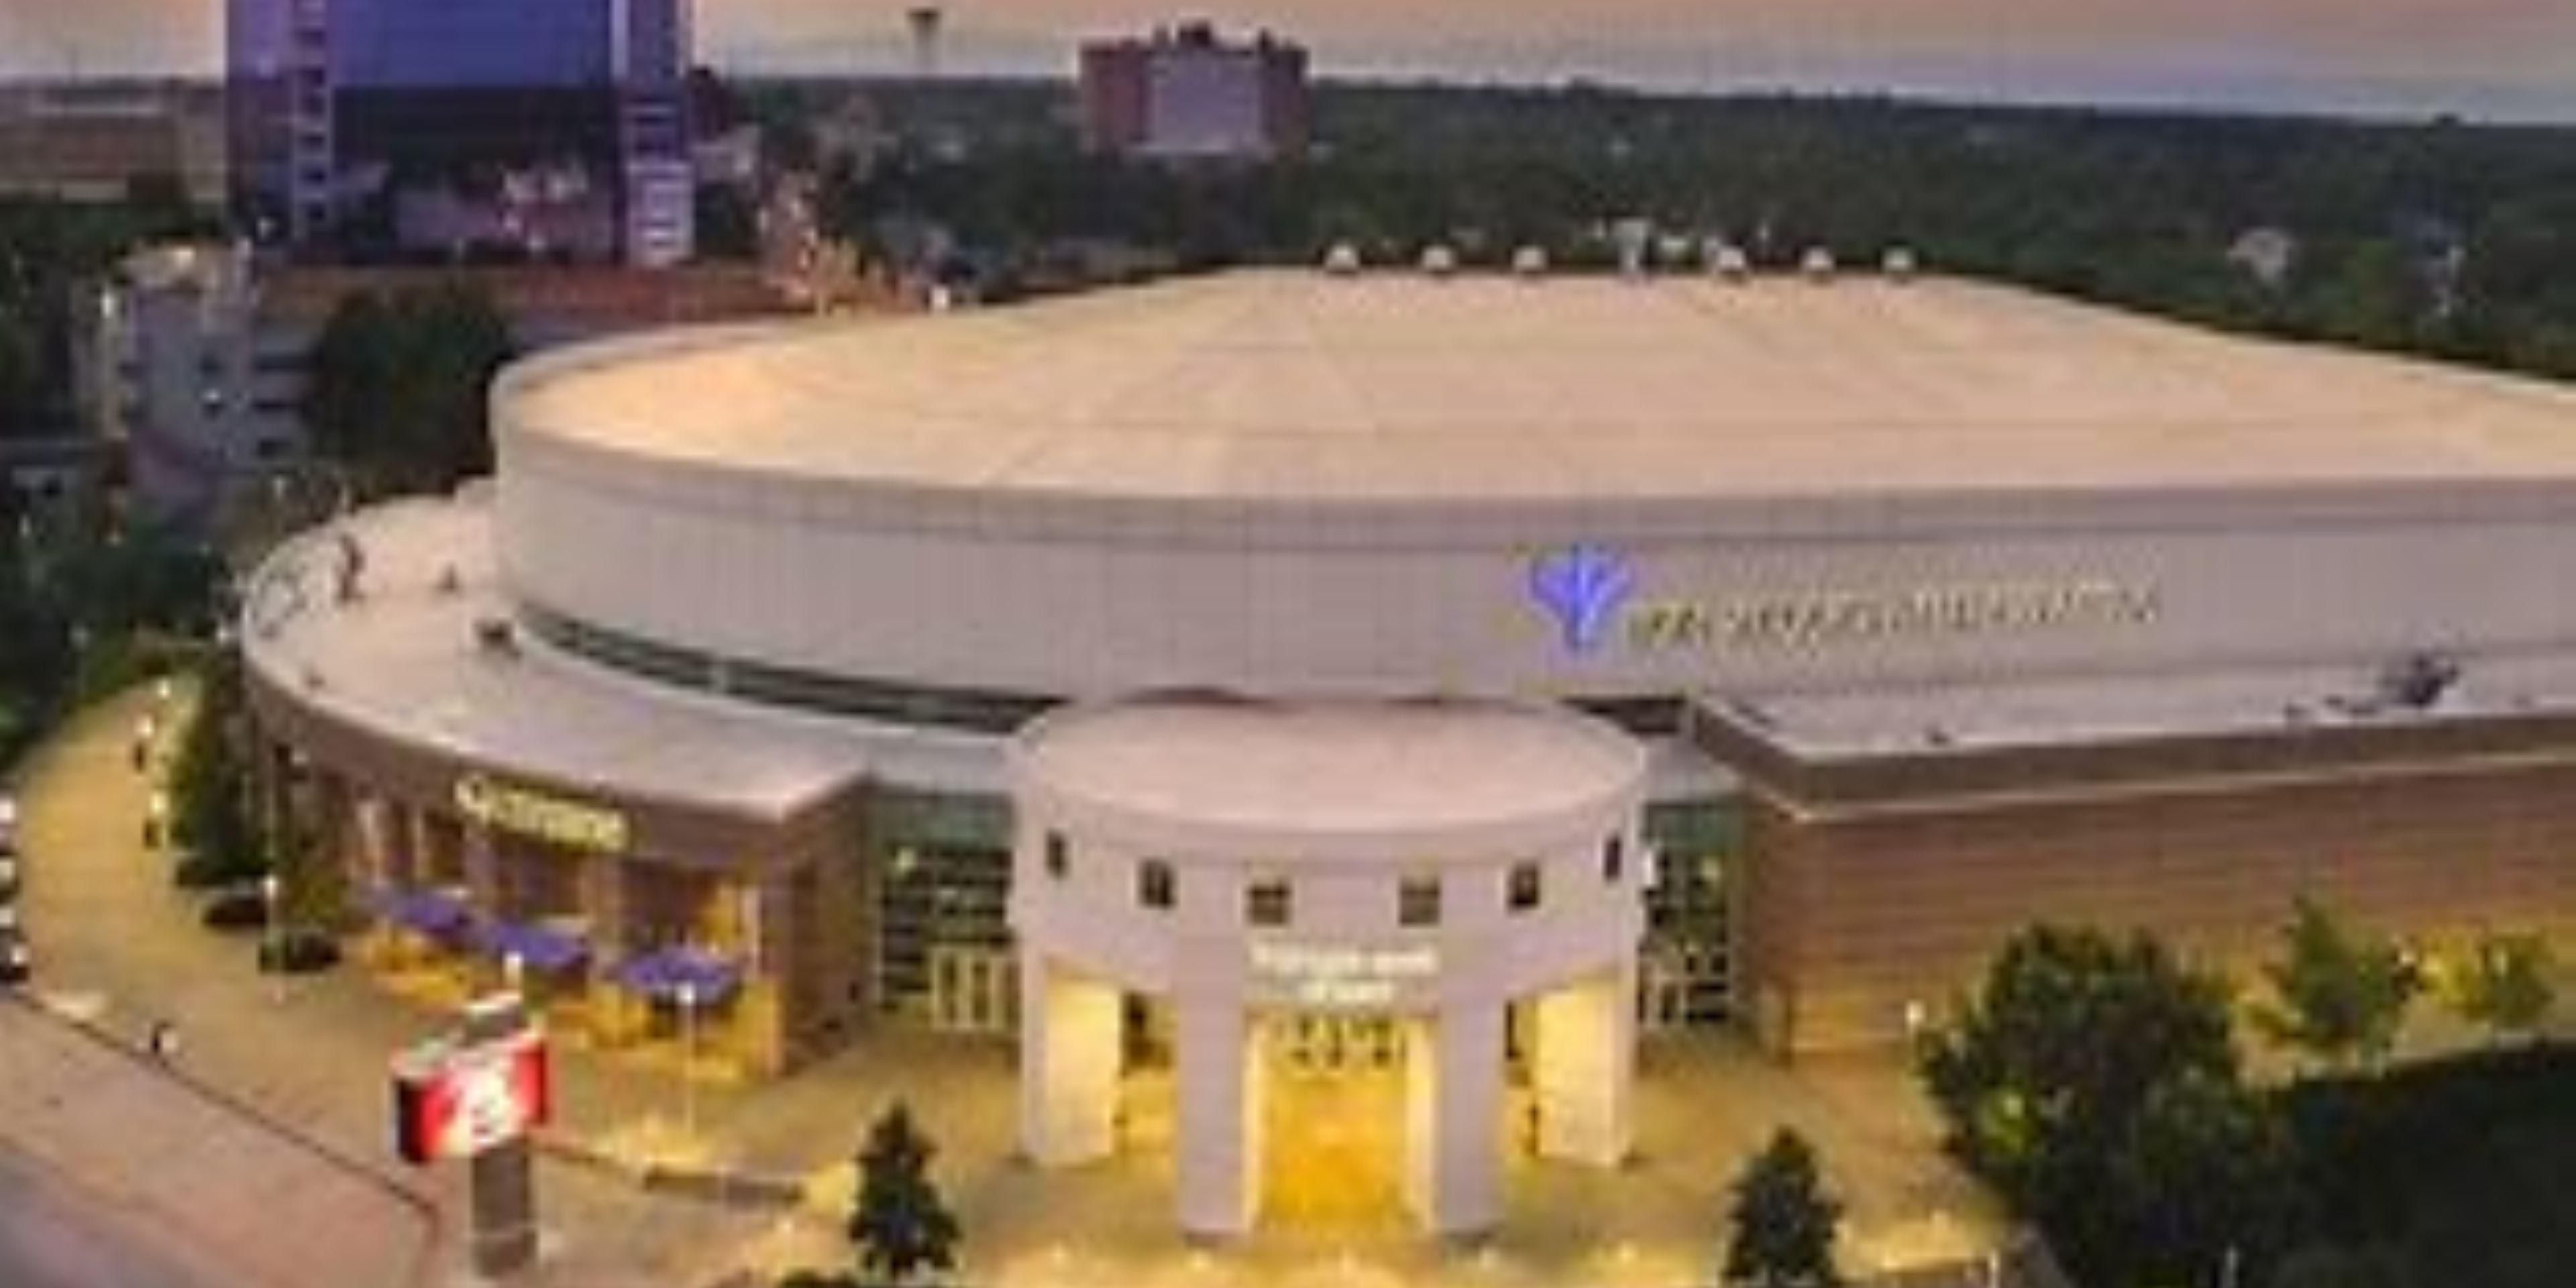 Close to Bon Secour Event Center where you can see a Reedy River hockey game, Concerts and many other events hosted in downtown Greenville!